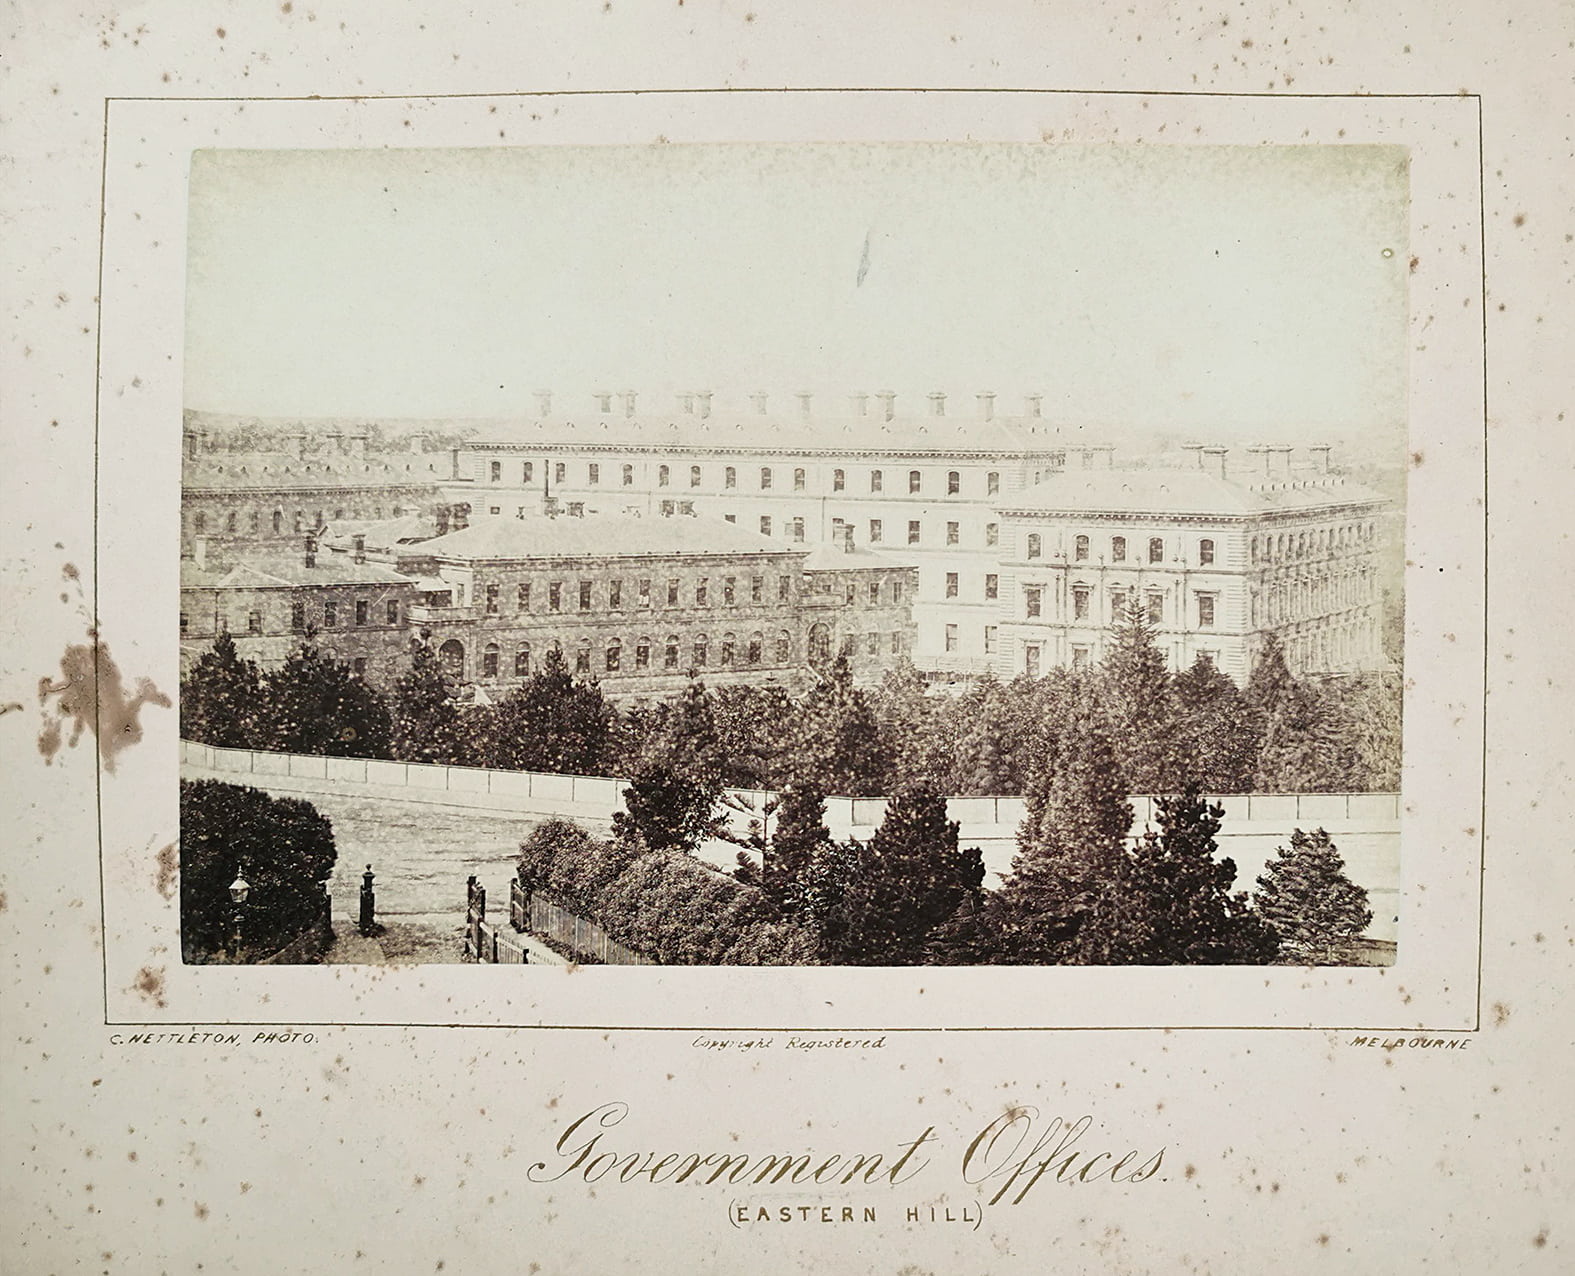 Government Offices. (Eastern Hill) - Antique Photograph from 1878